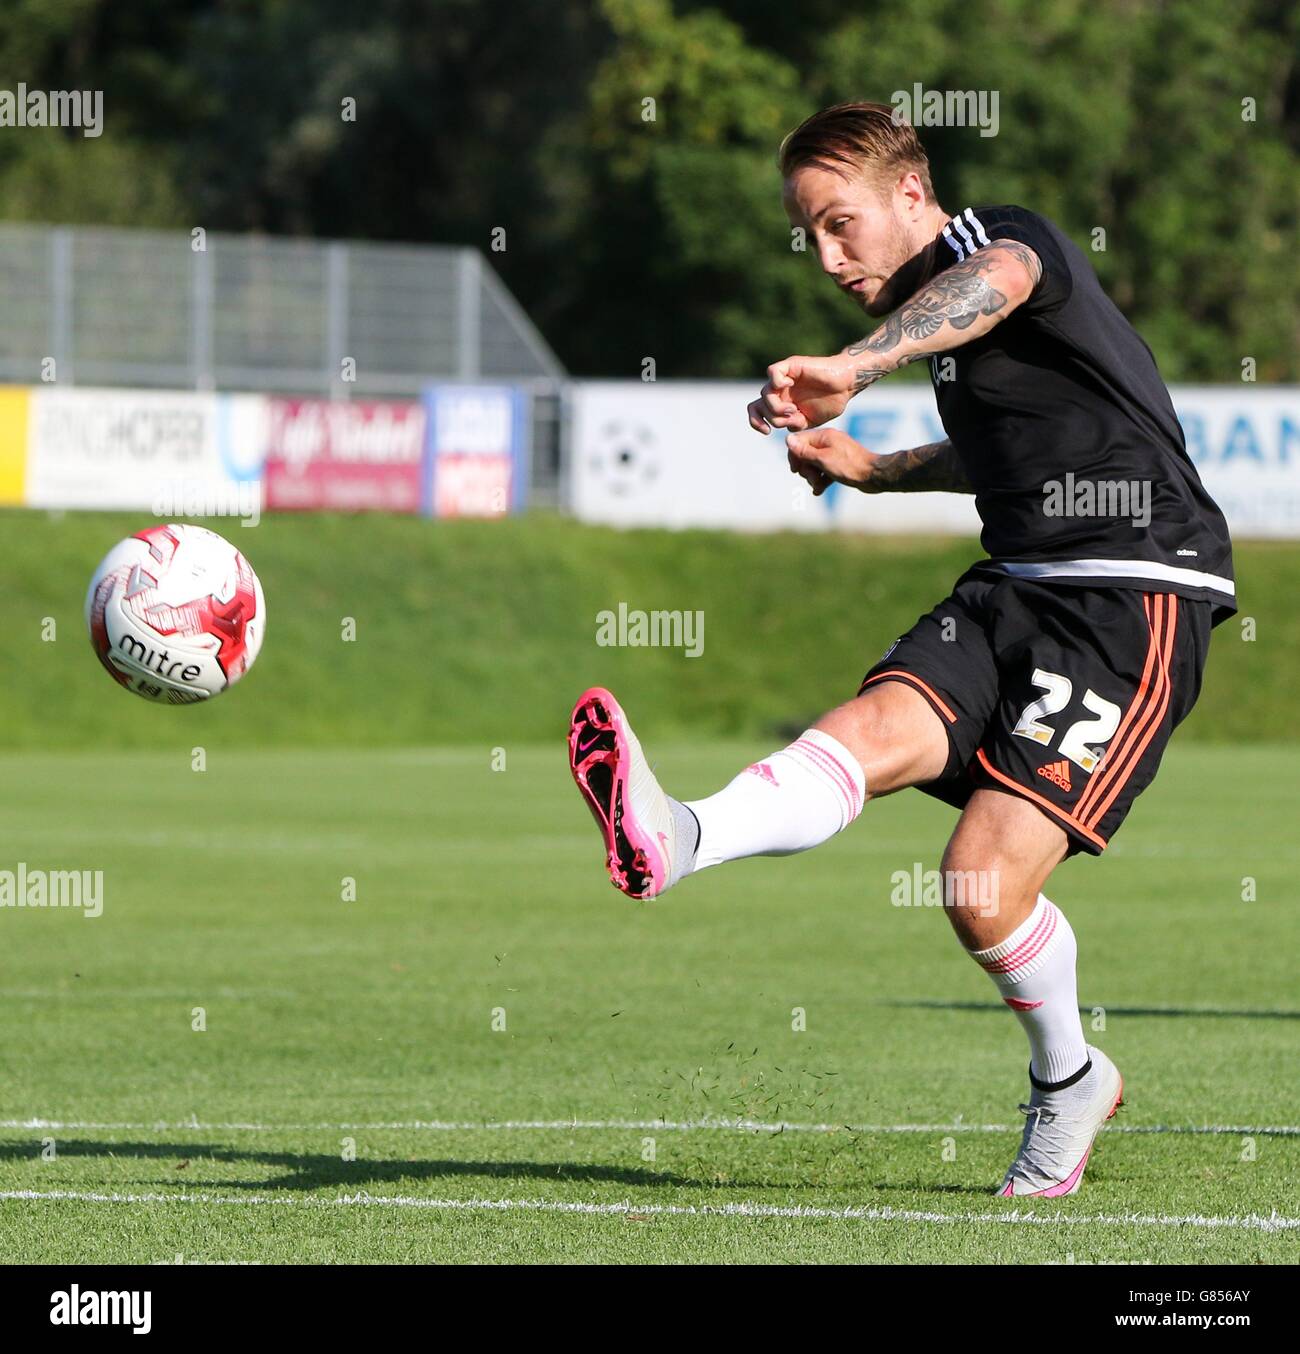 Soccer - Pre Season Friendly - Hertha BSC v Fulham - Athletic Arena Schladming. Fulham's Adam Taggart Stock Photo